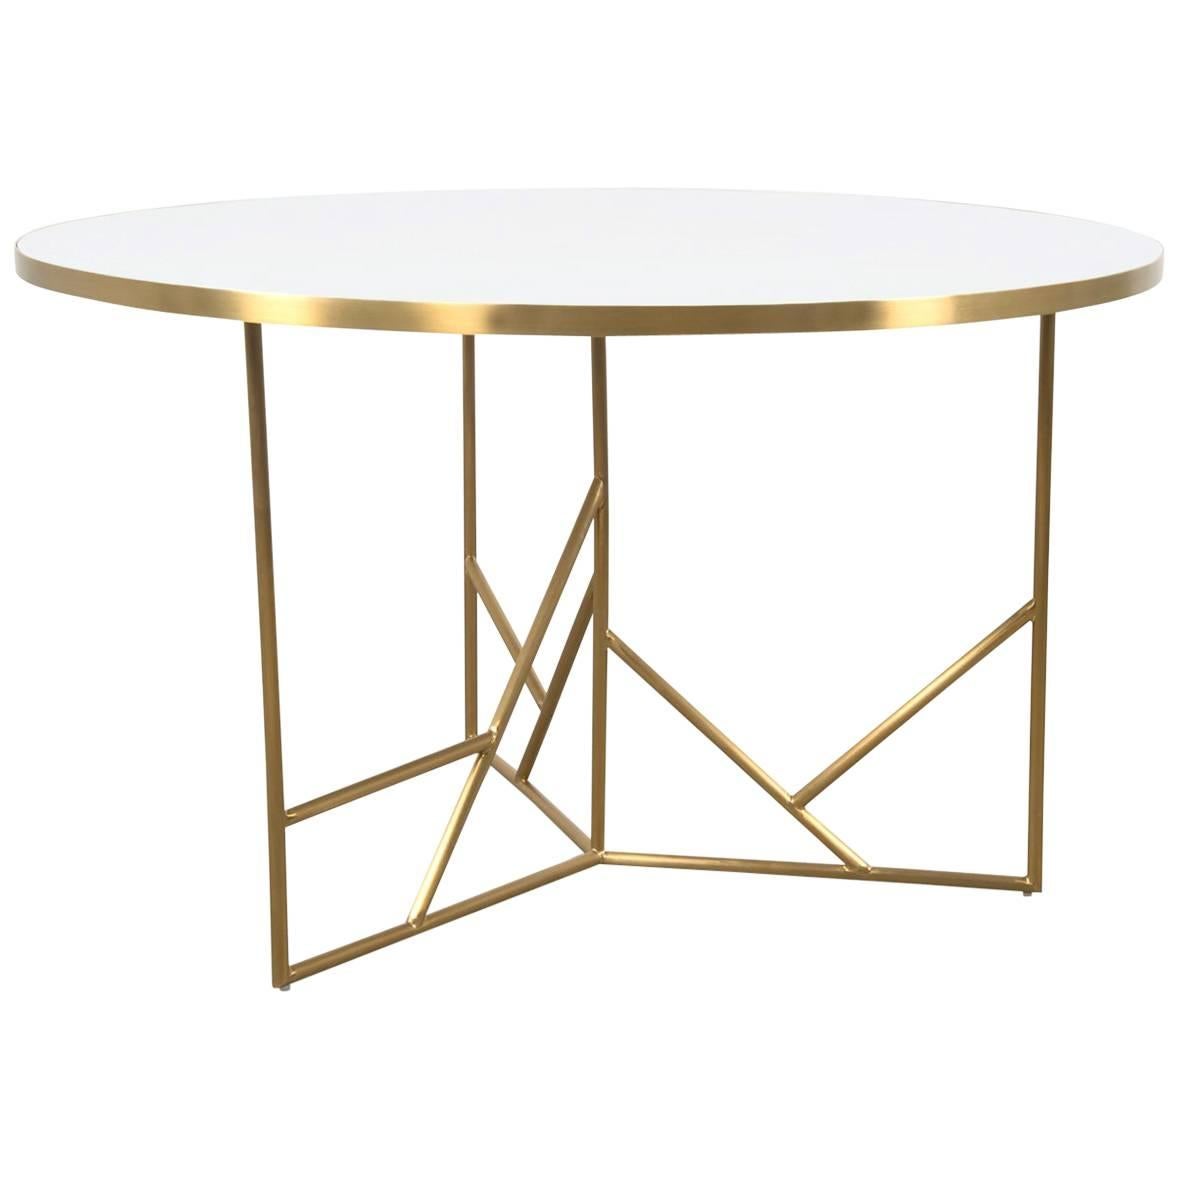 Modern Midcentury Dining Table White Concrete Top and Geometric Brass Legs